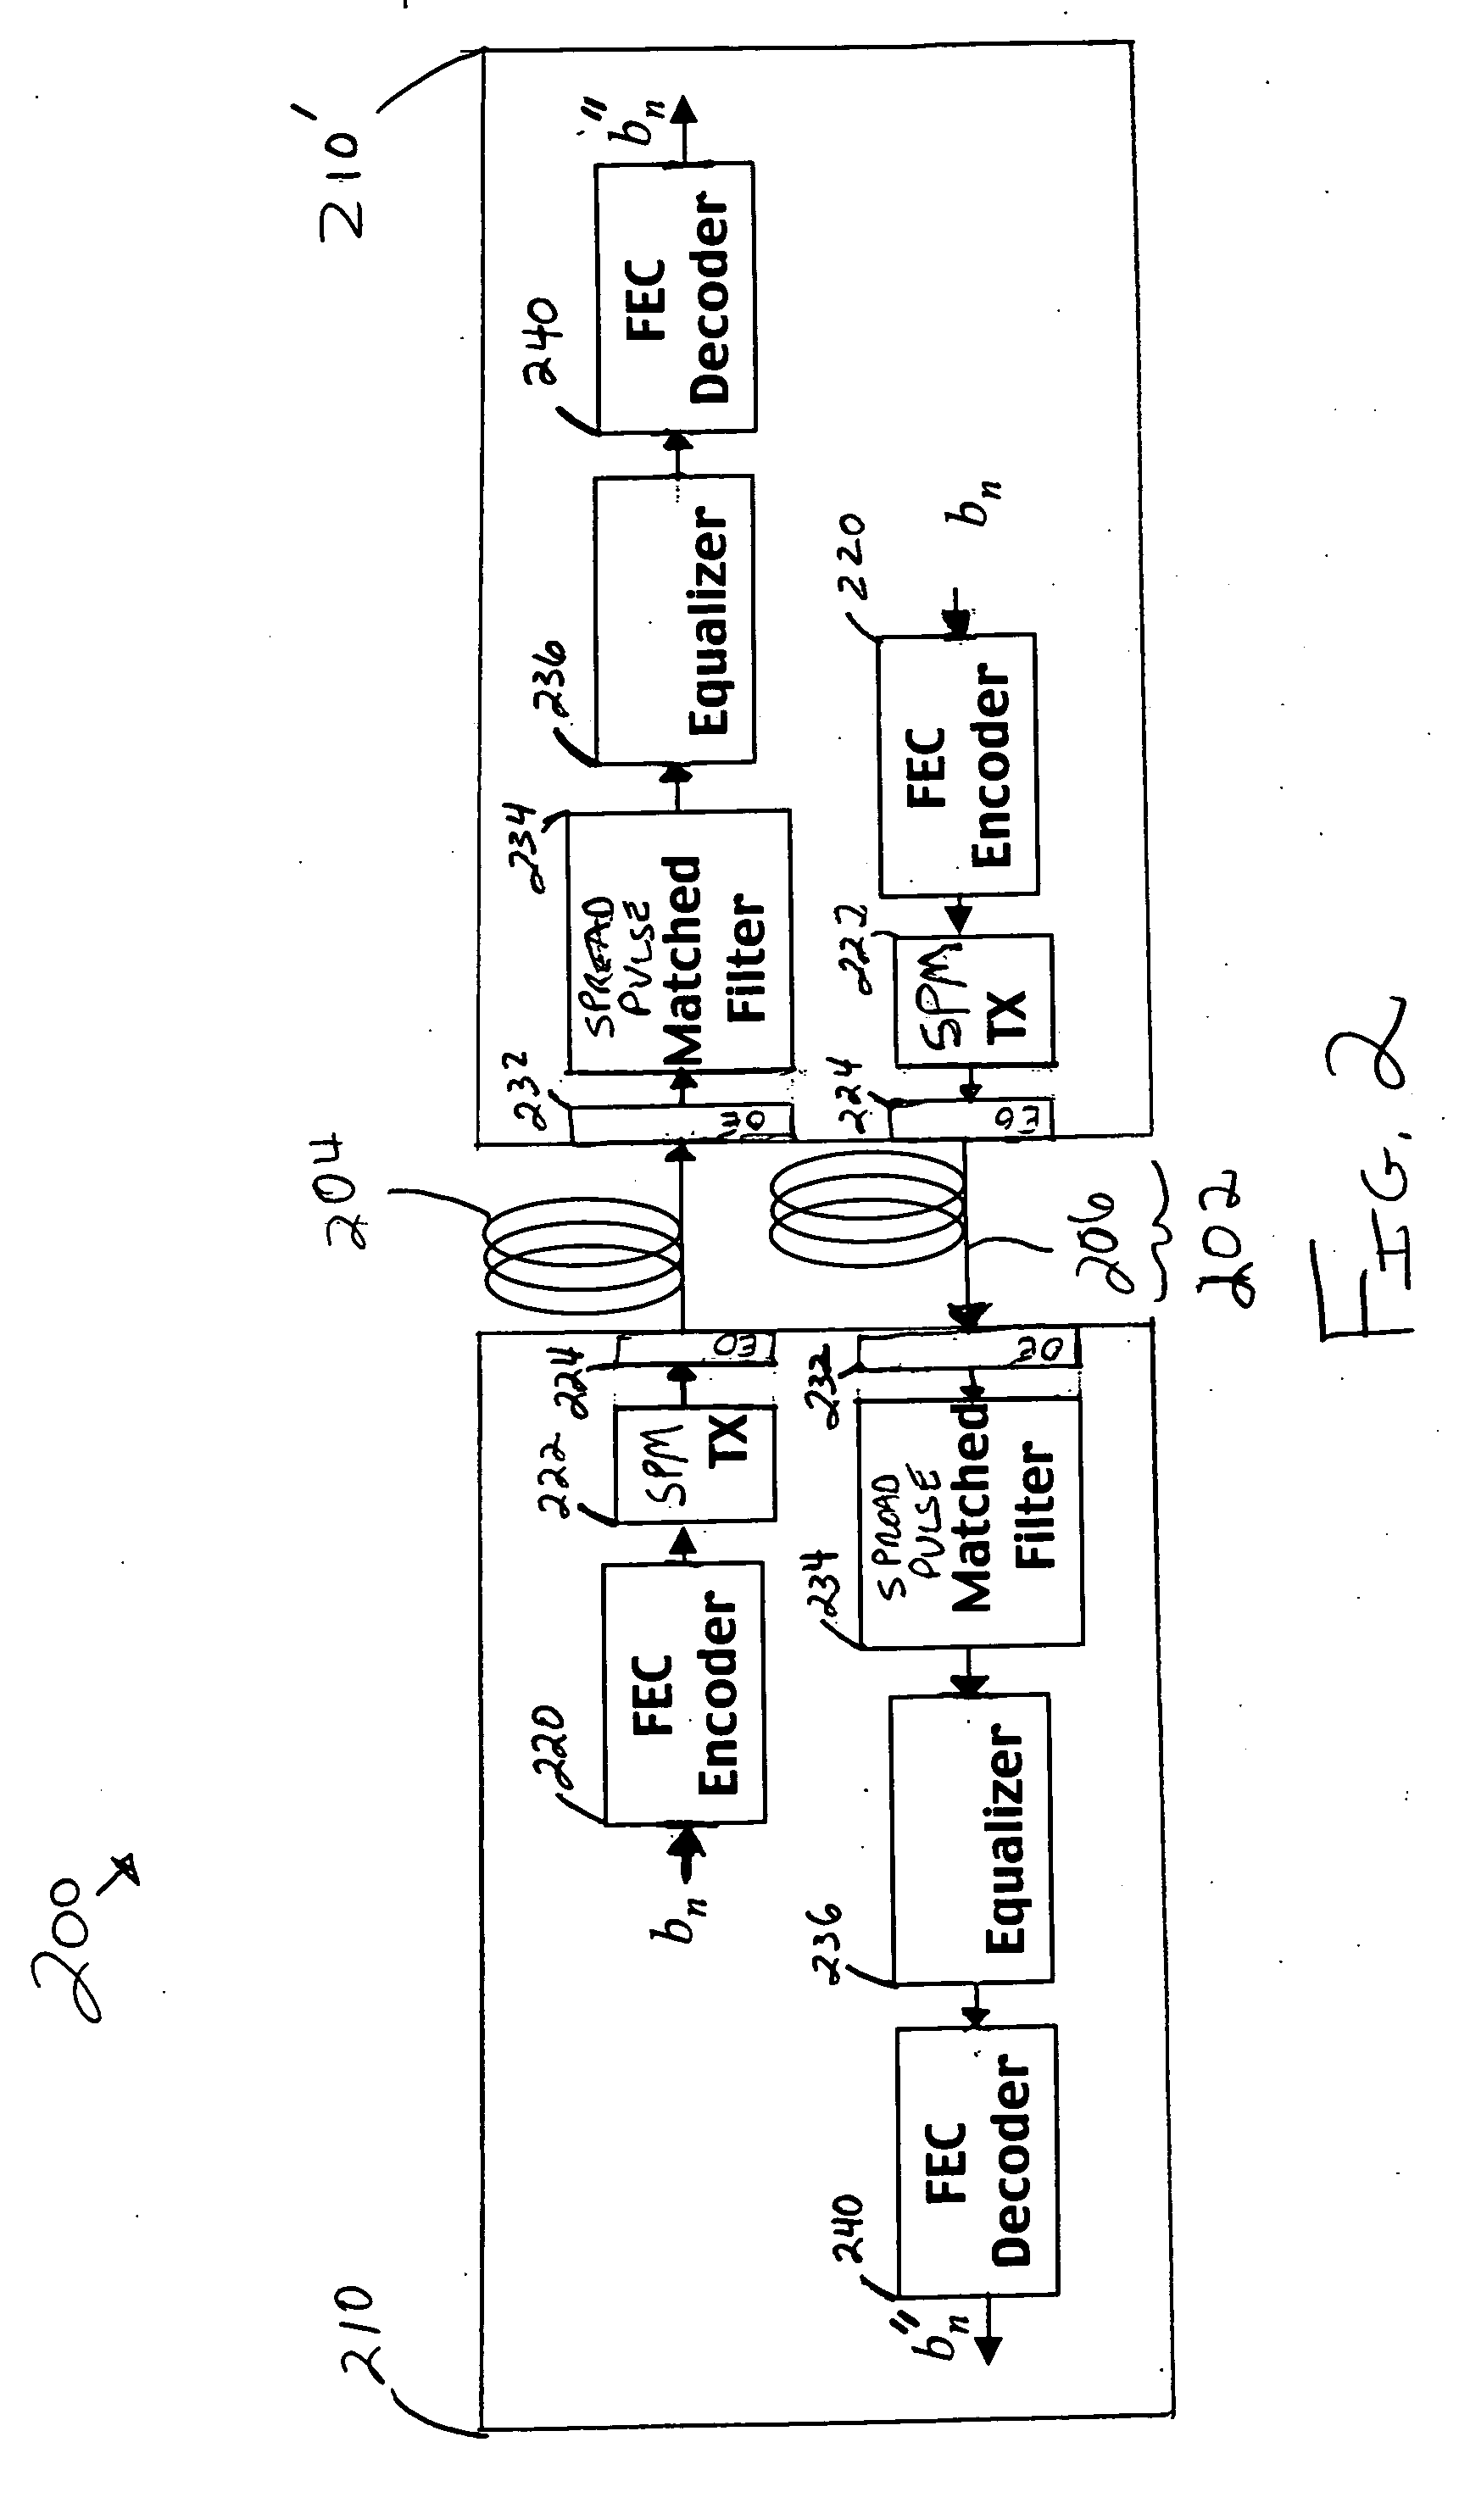 Apparatus with spread-pulse modulation and nonlinear time domain equalization for fiber optic communication channels